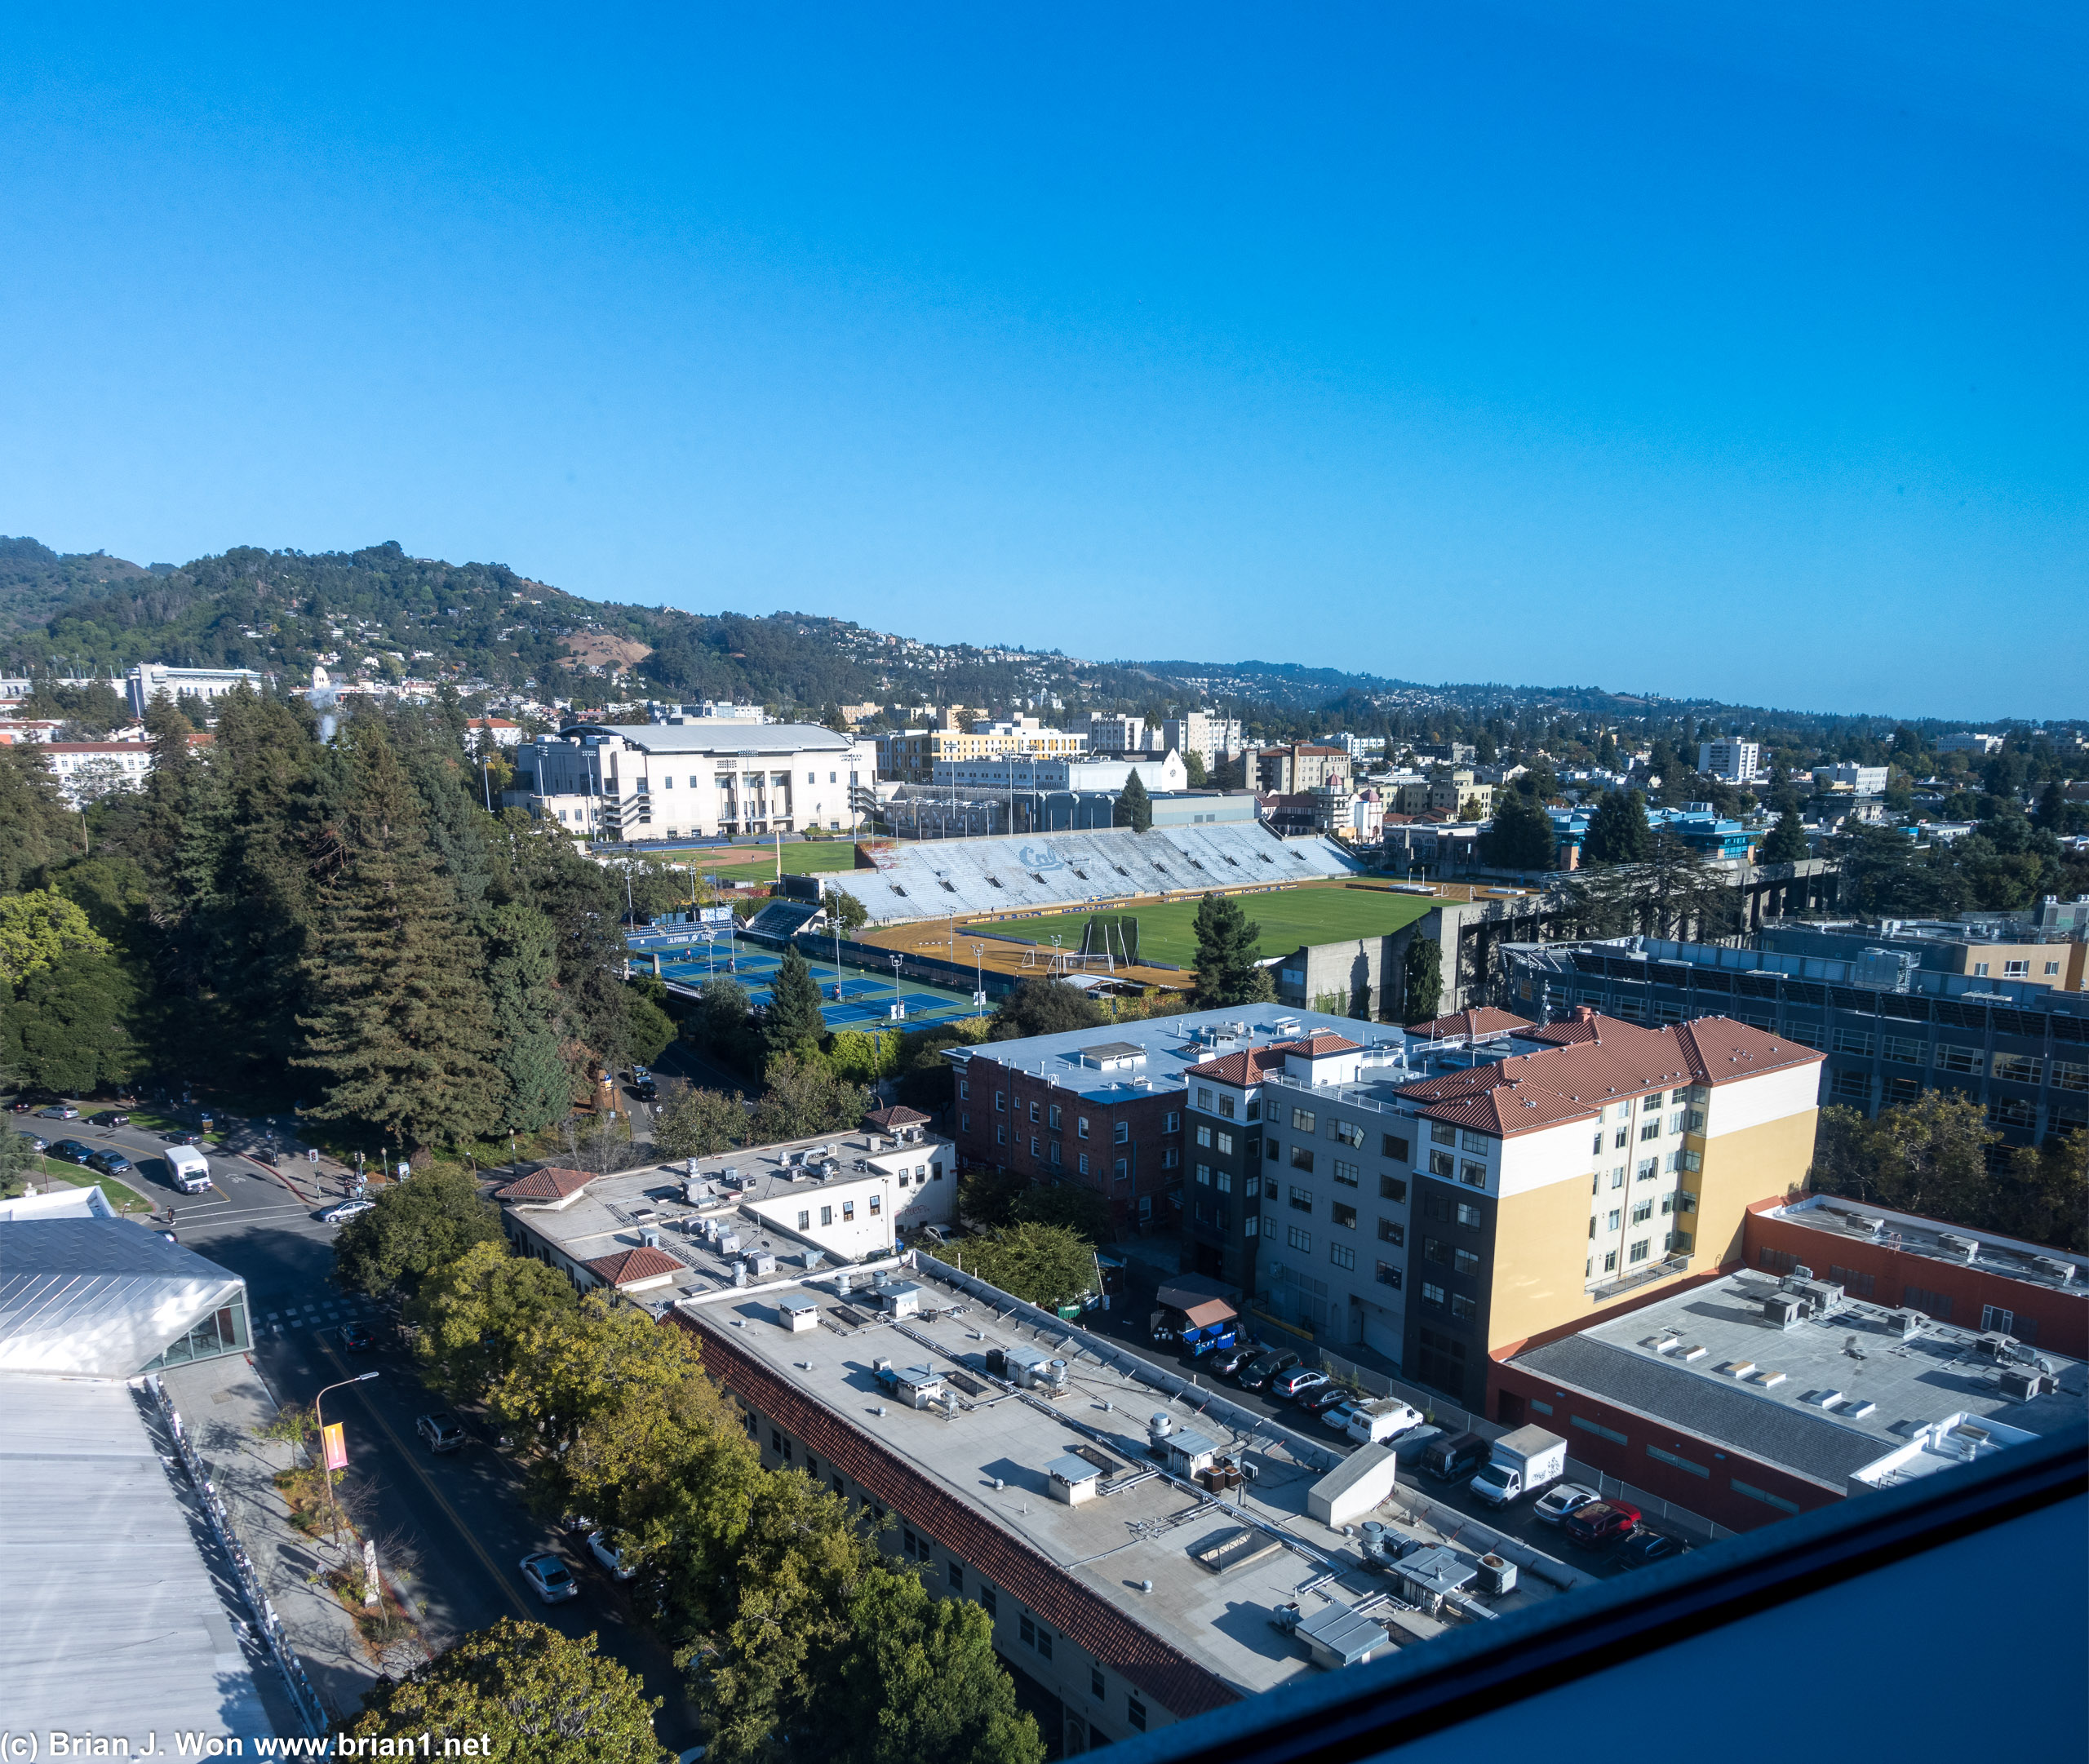 View of the UC Berkeley campus.